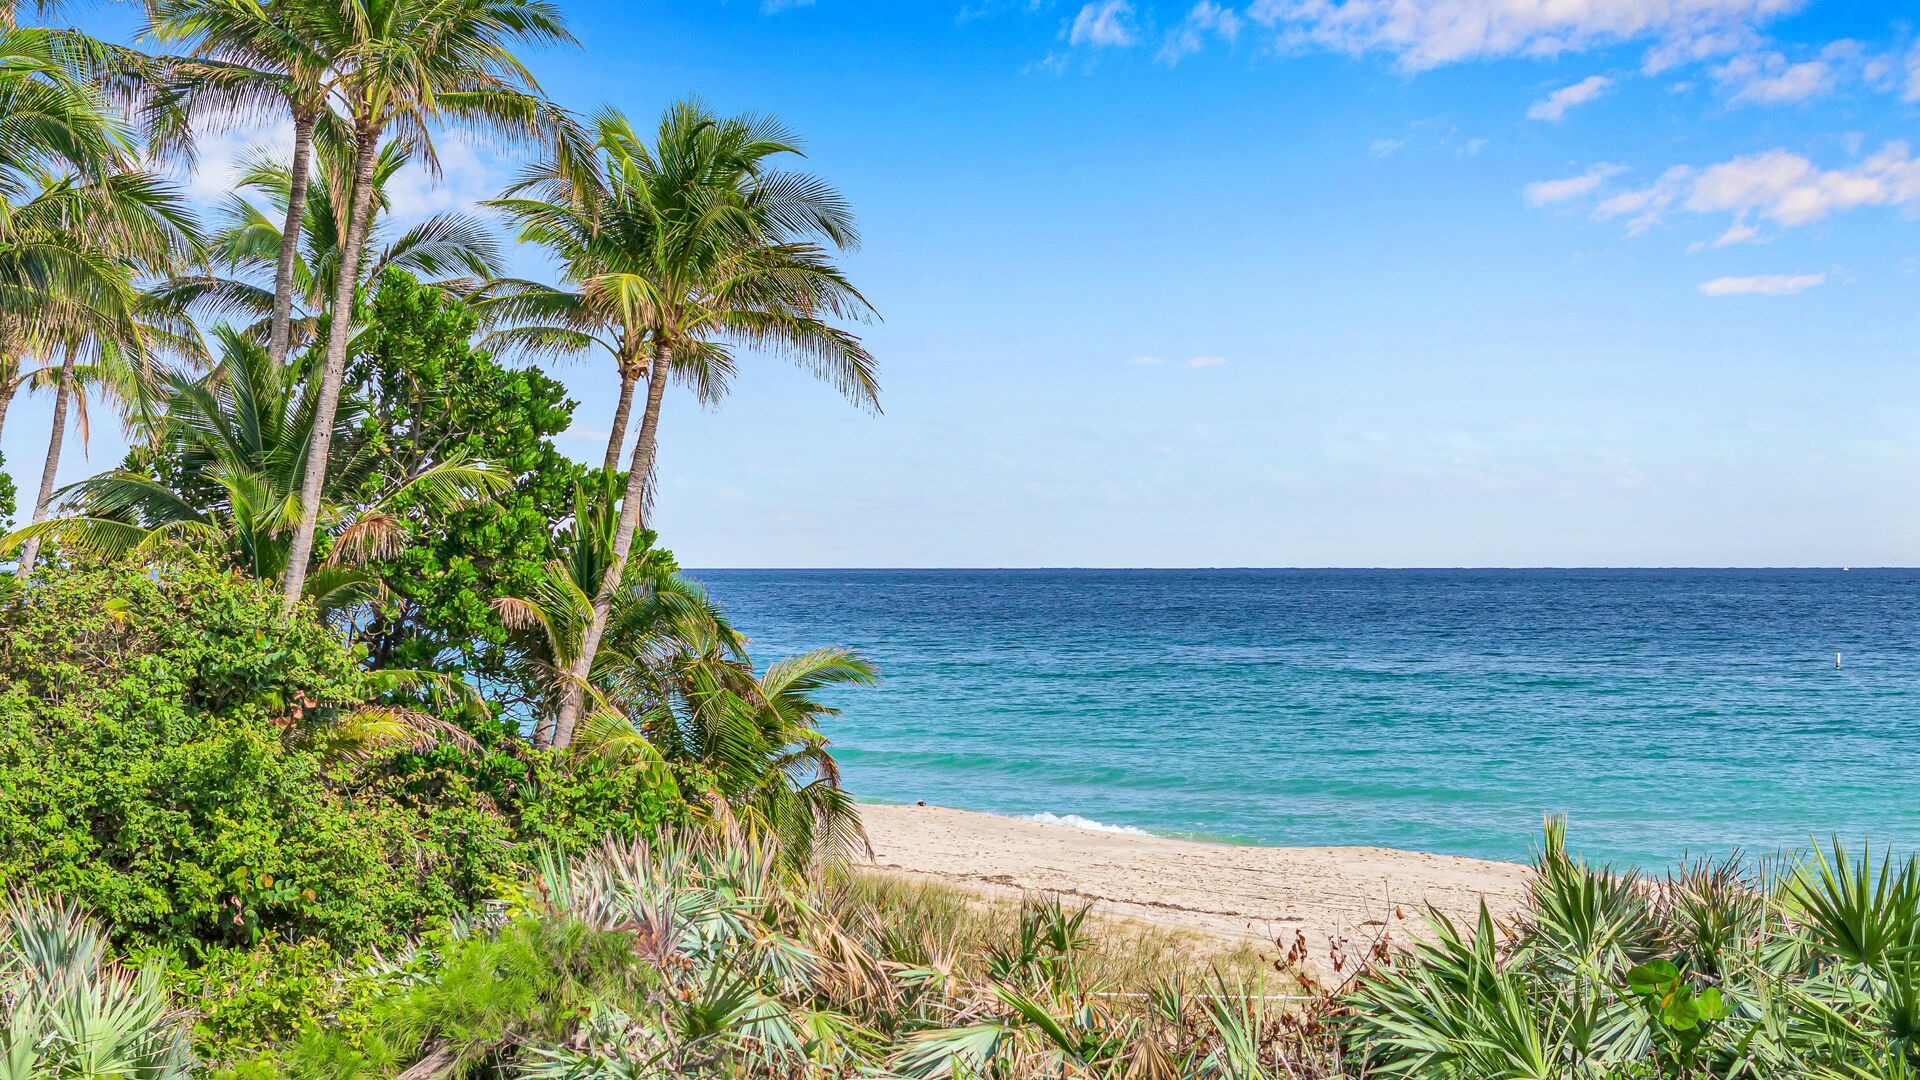 Just cross the picturesque A1A boulevard dotted with restaurants to unwind on the renown Fort Lauderdale beach.